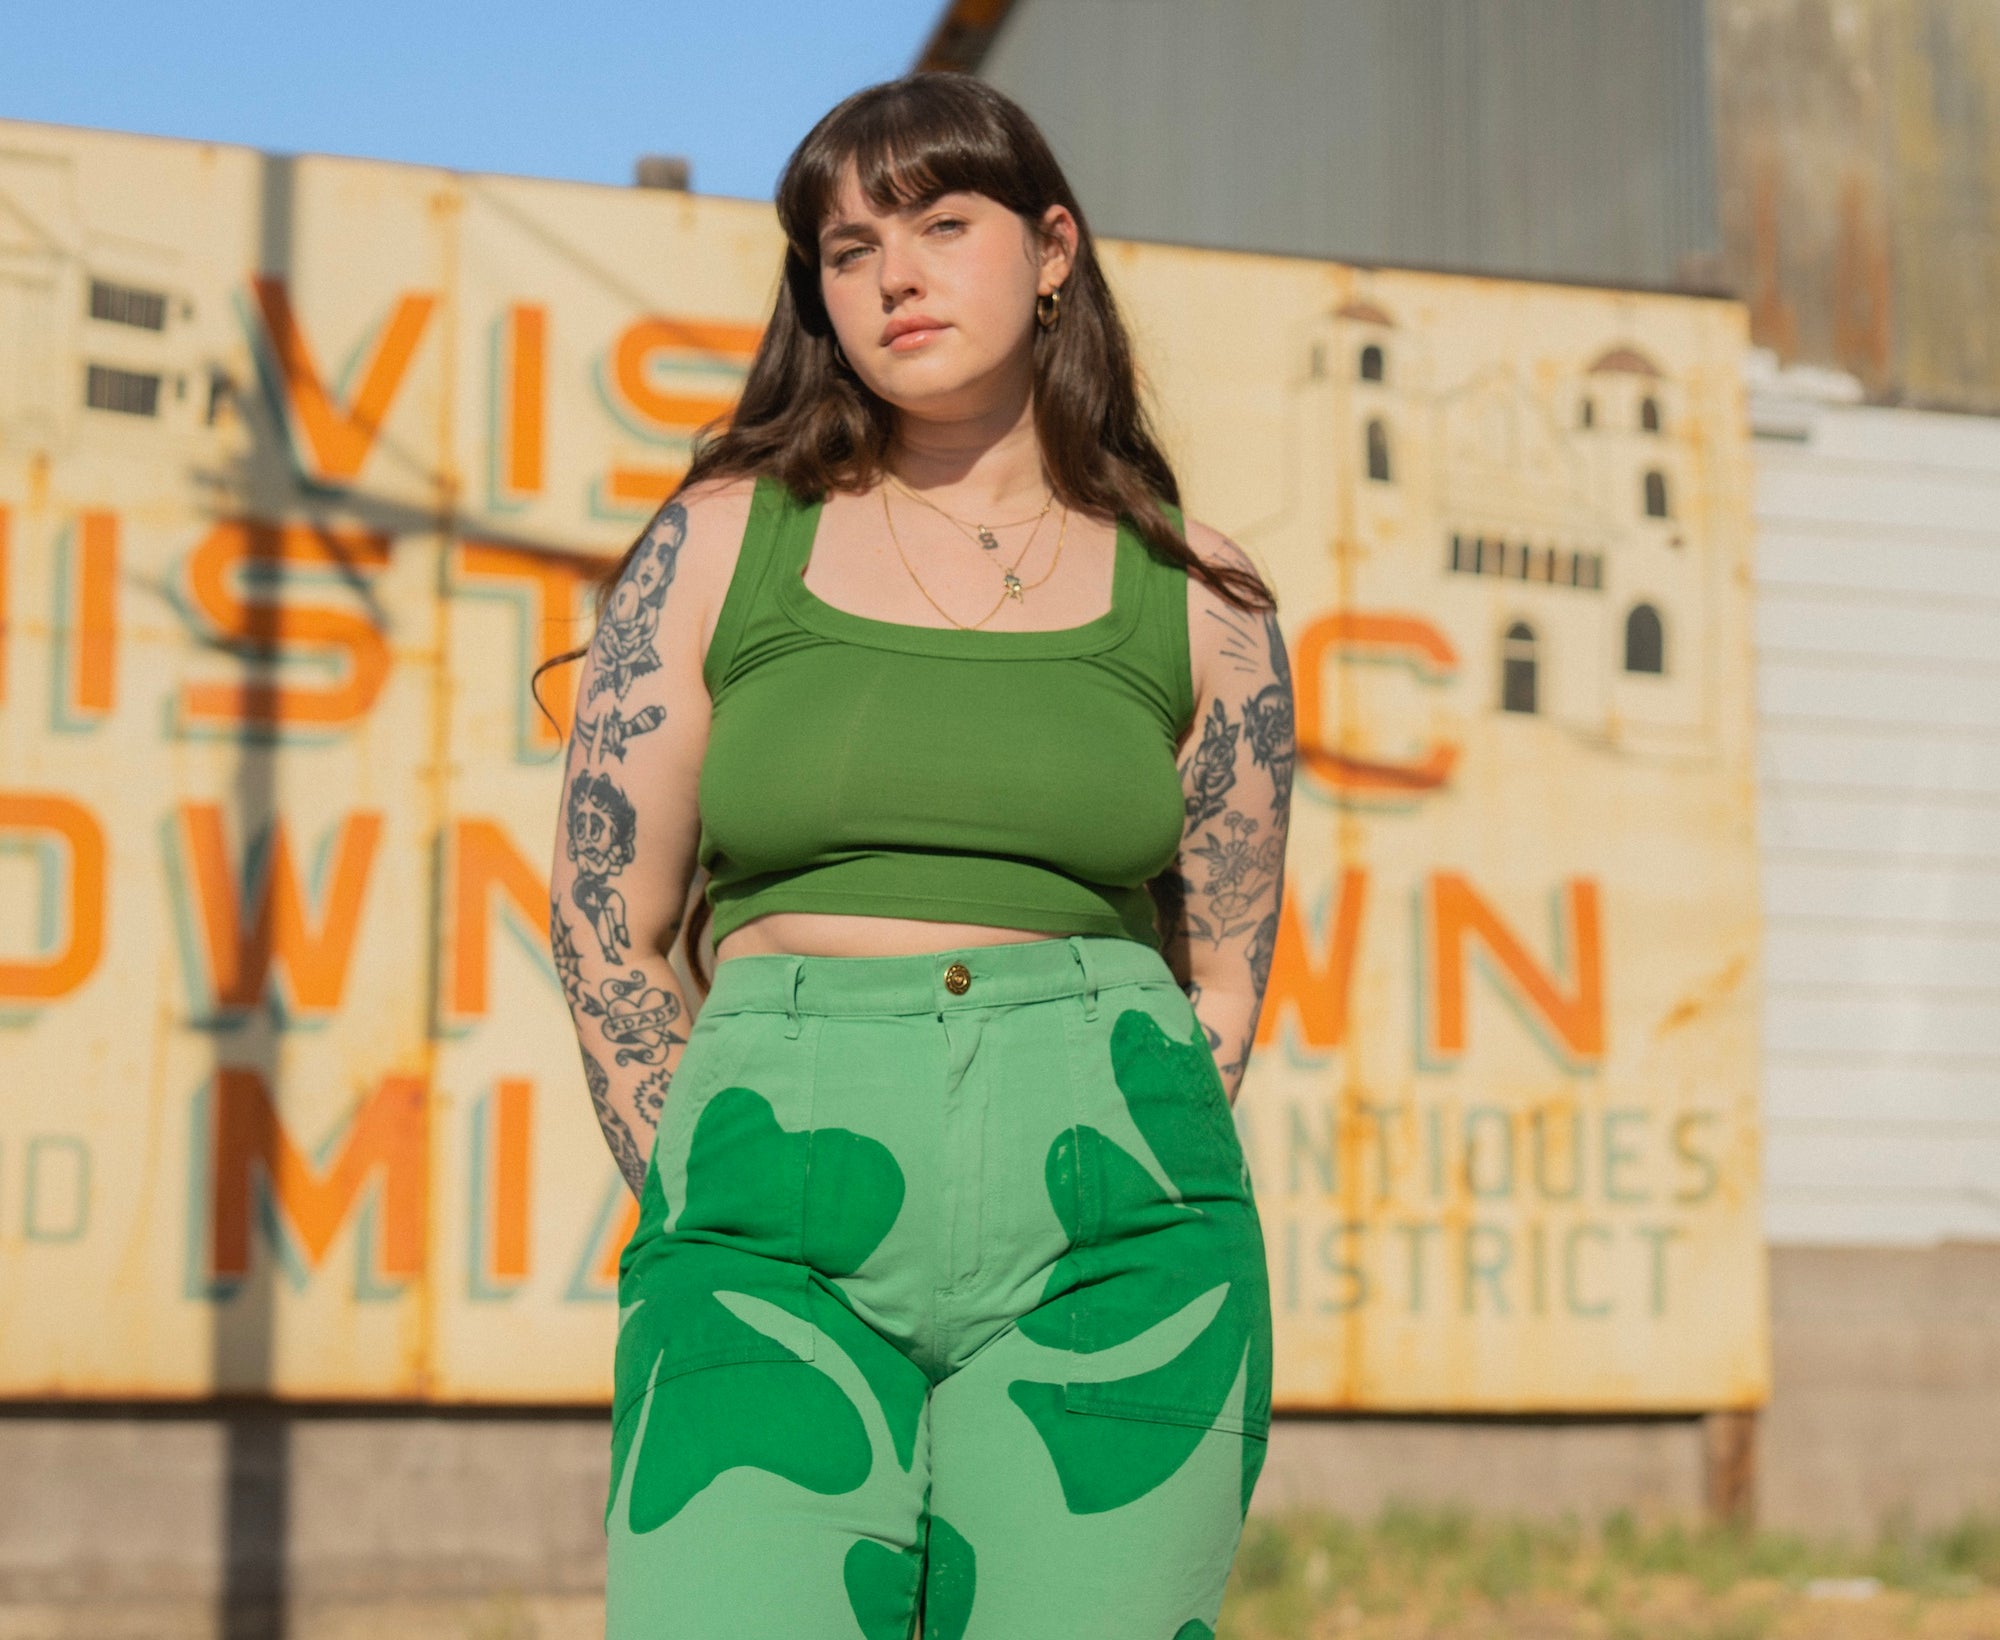 Sydney is wearing Cropped Tank Top in Lawn Green and Icon Work Pants in Clover